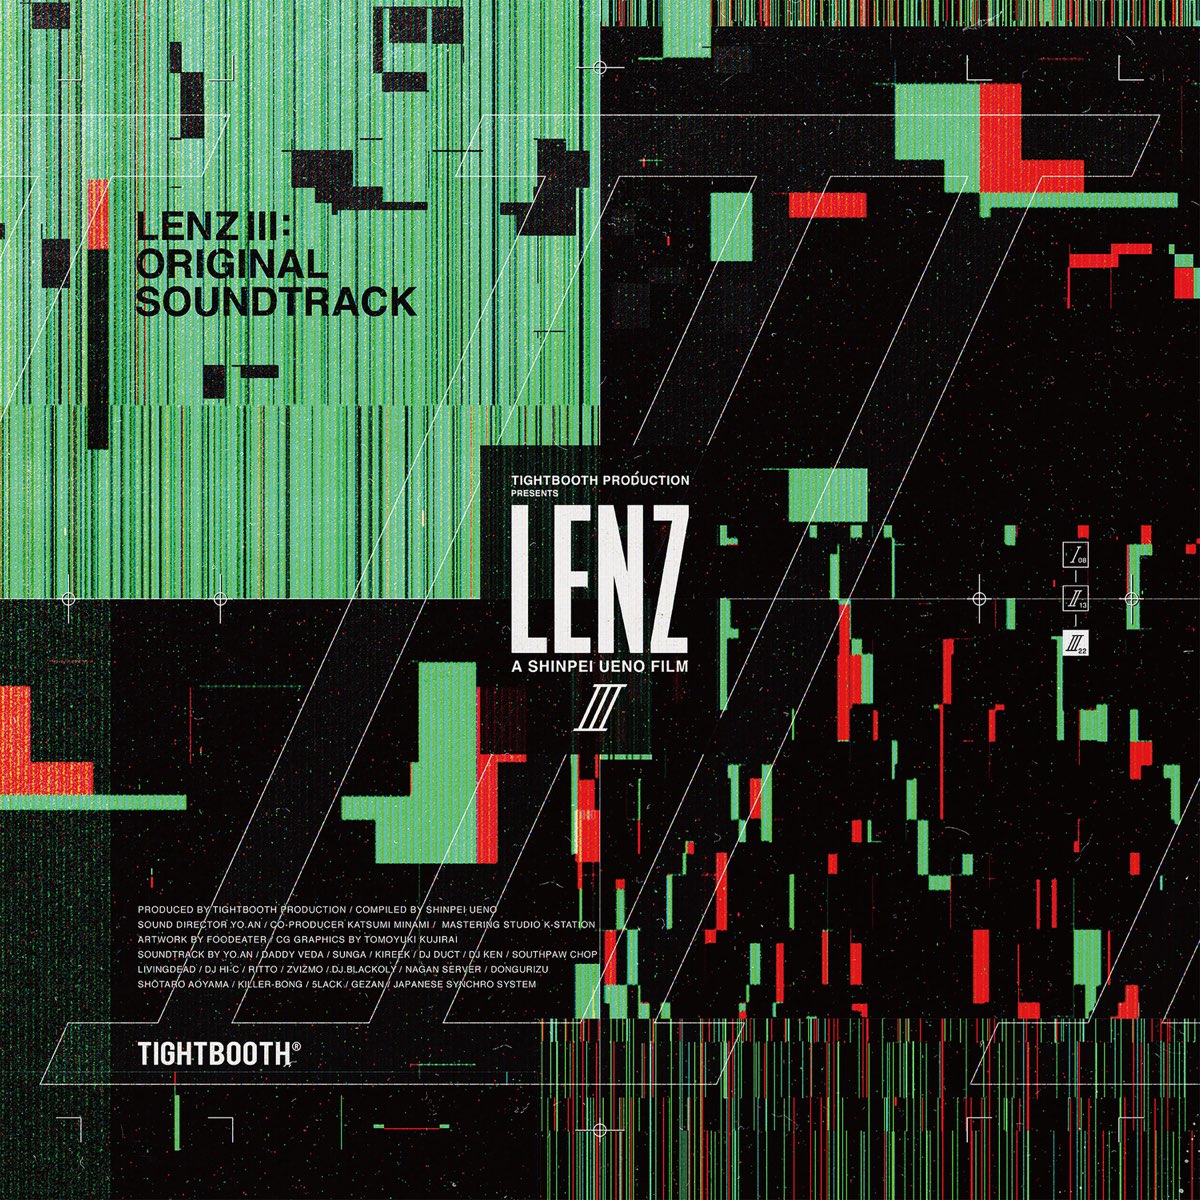 Lenz III (Original Soundtrack) by Various Artists on Apple Music